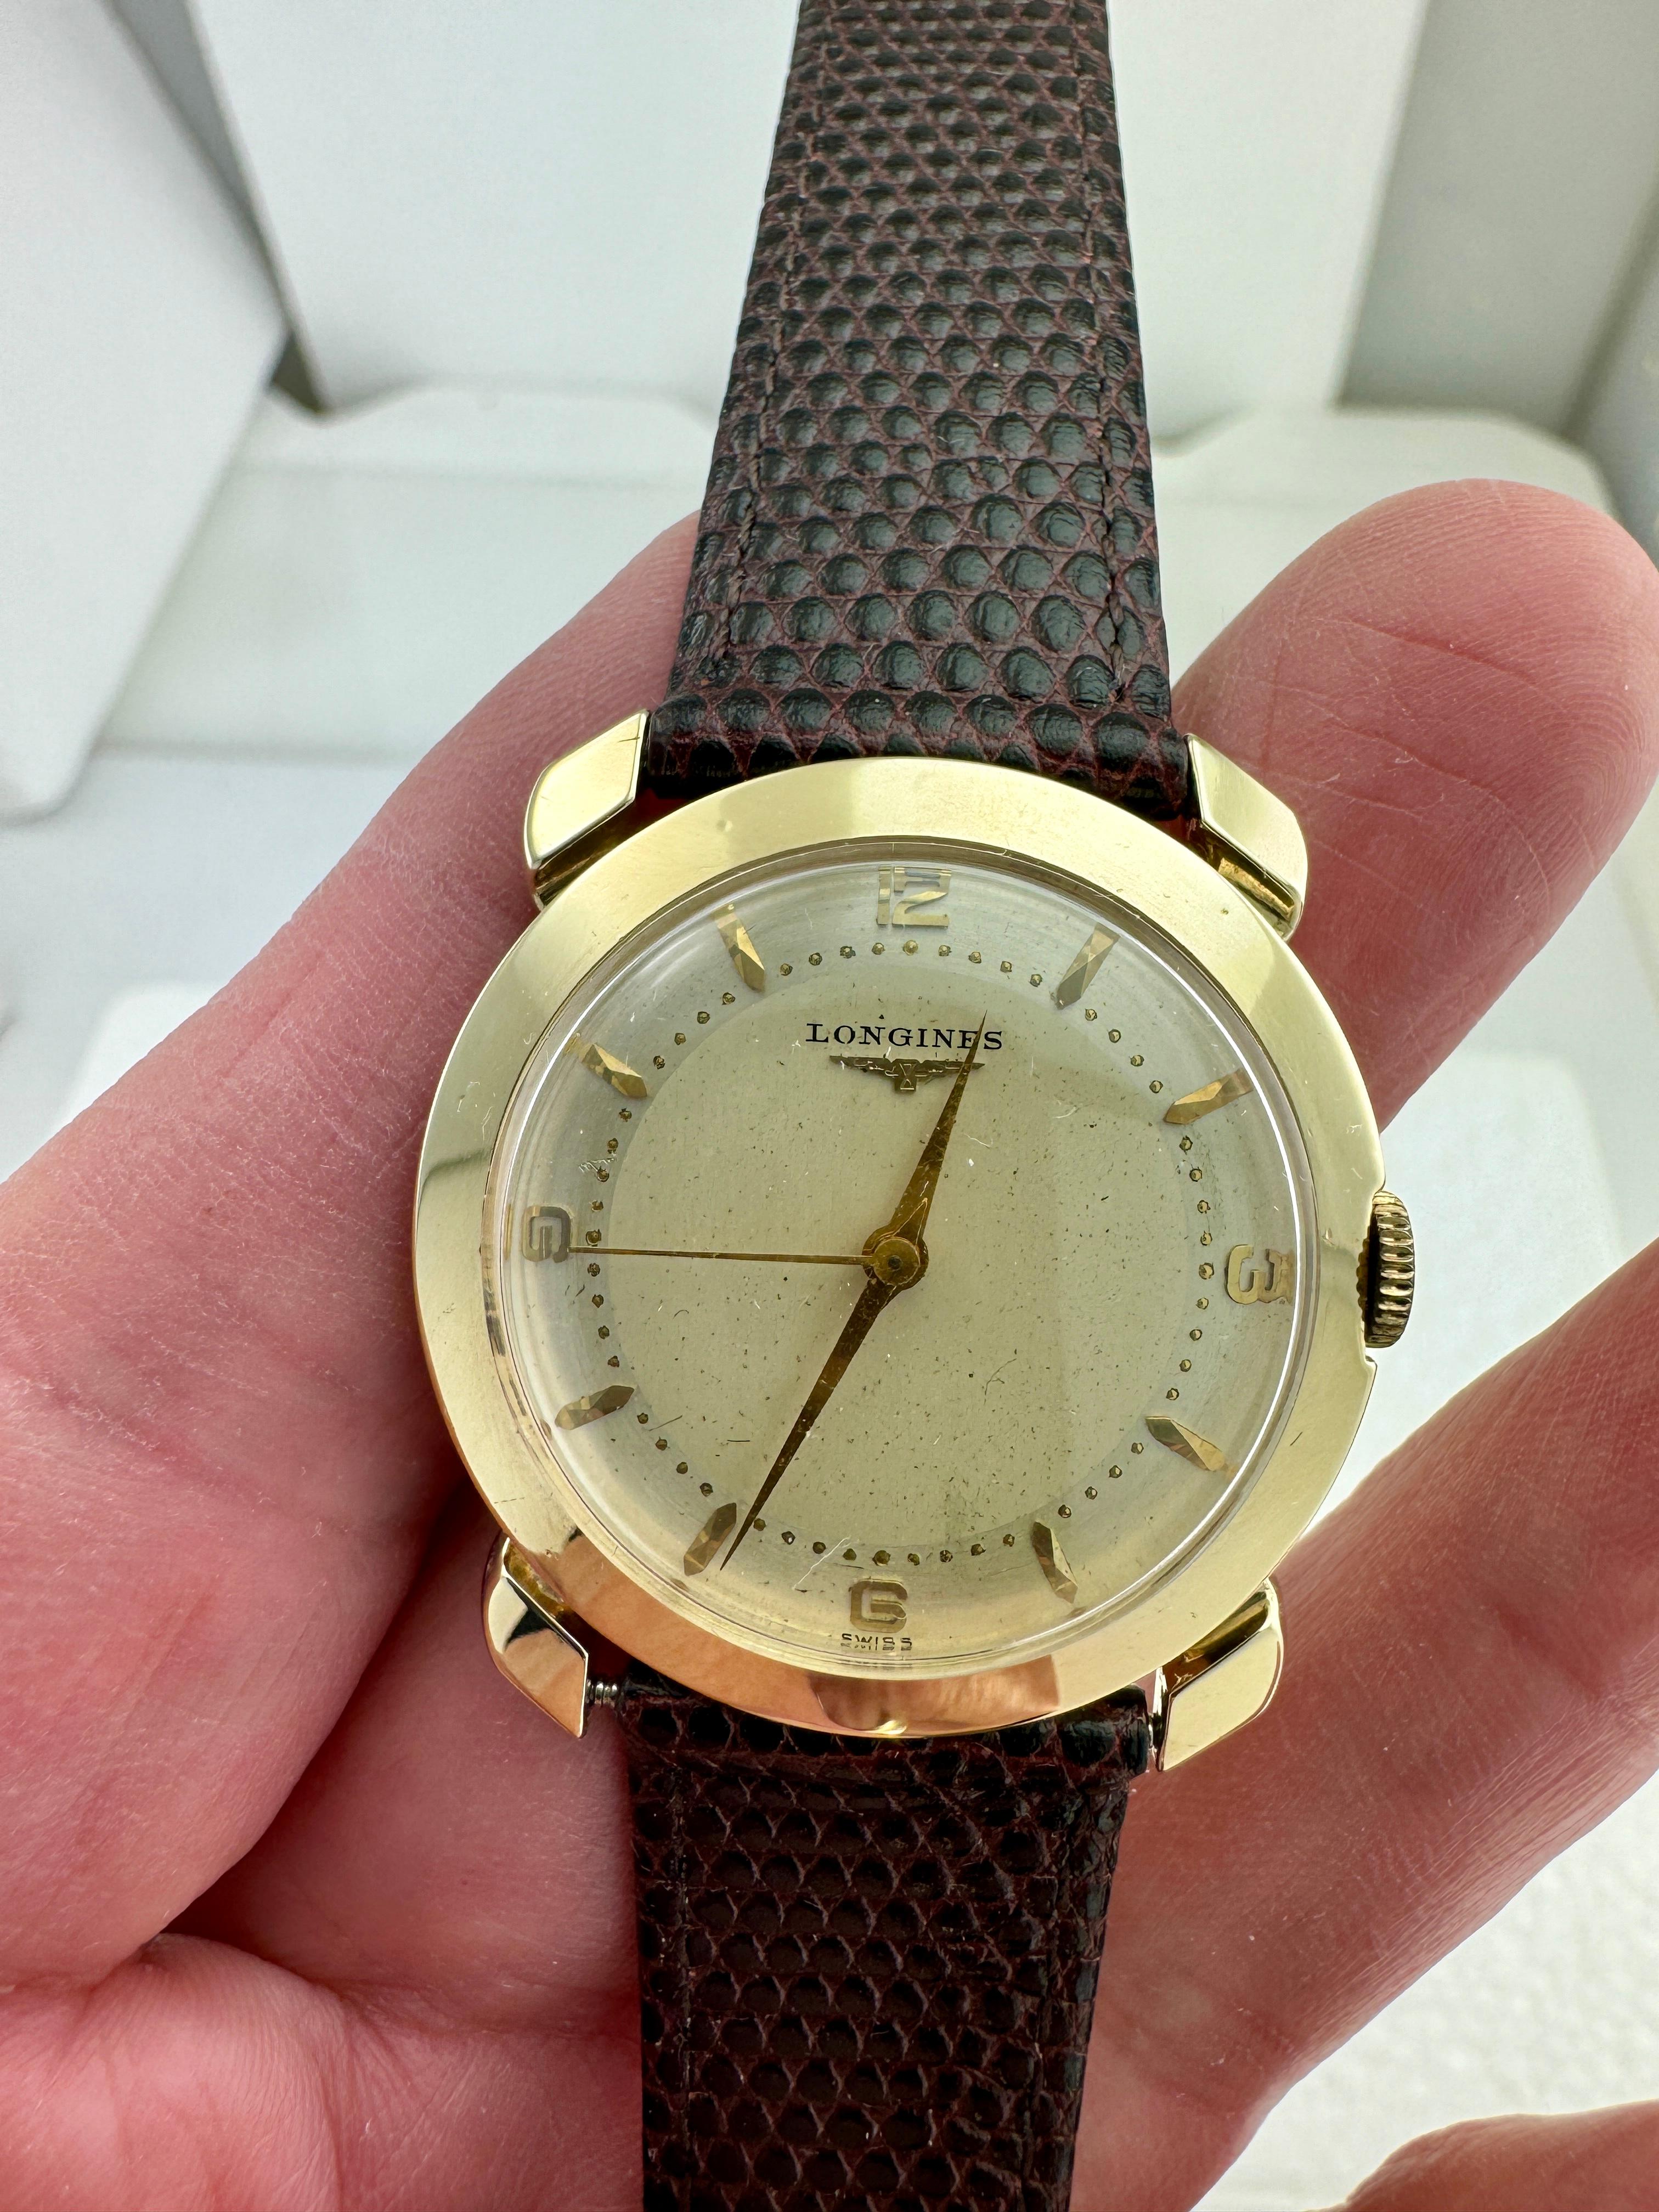 Vintage Longines yellow gold wristwatch, circa 1950s.

This vintage 1950s Longines wristwatch has a 17 Jewels Calibre 22LS manual wind movement housed in its original 14k yellow gold case.  The original dial shows some patina and compliments the